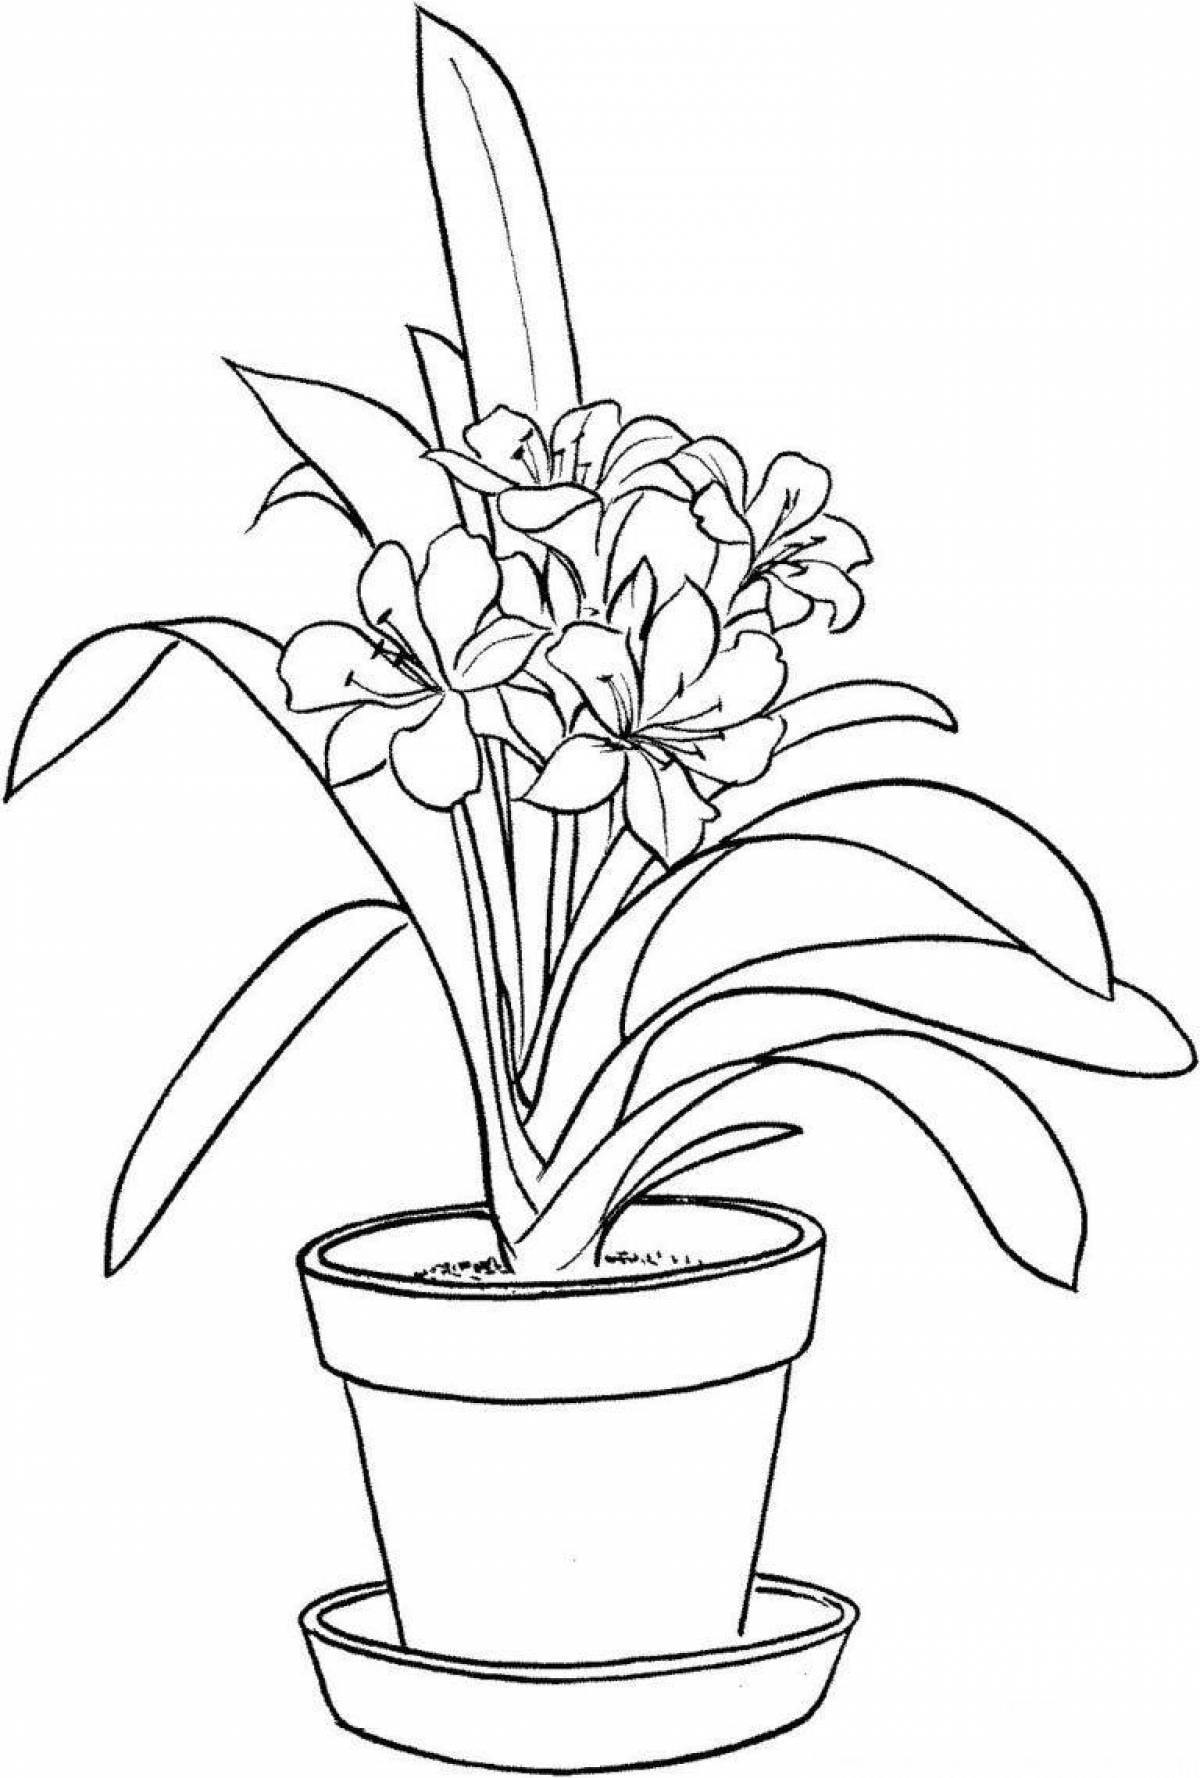 Sparkling potted flowers coloring book for teens